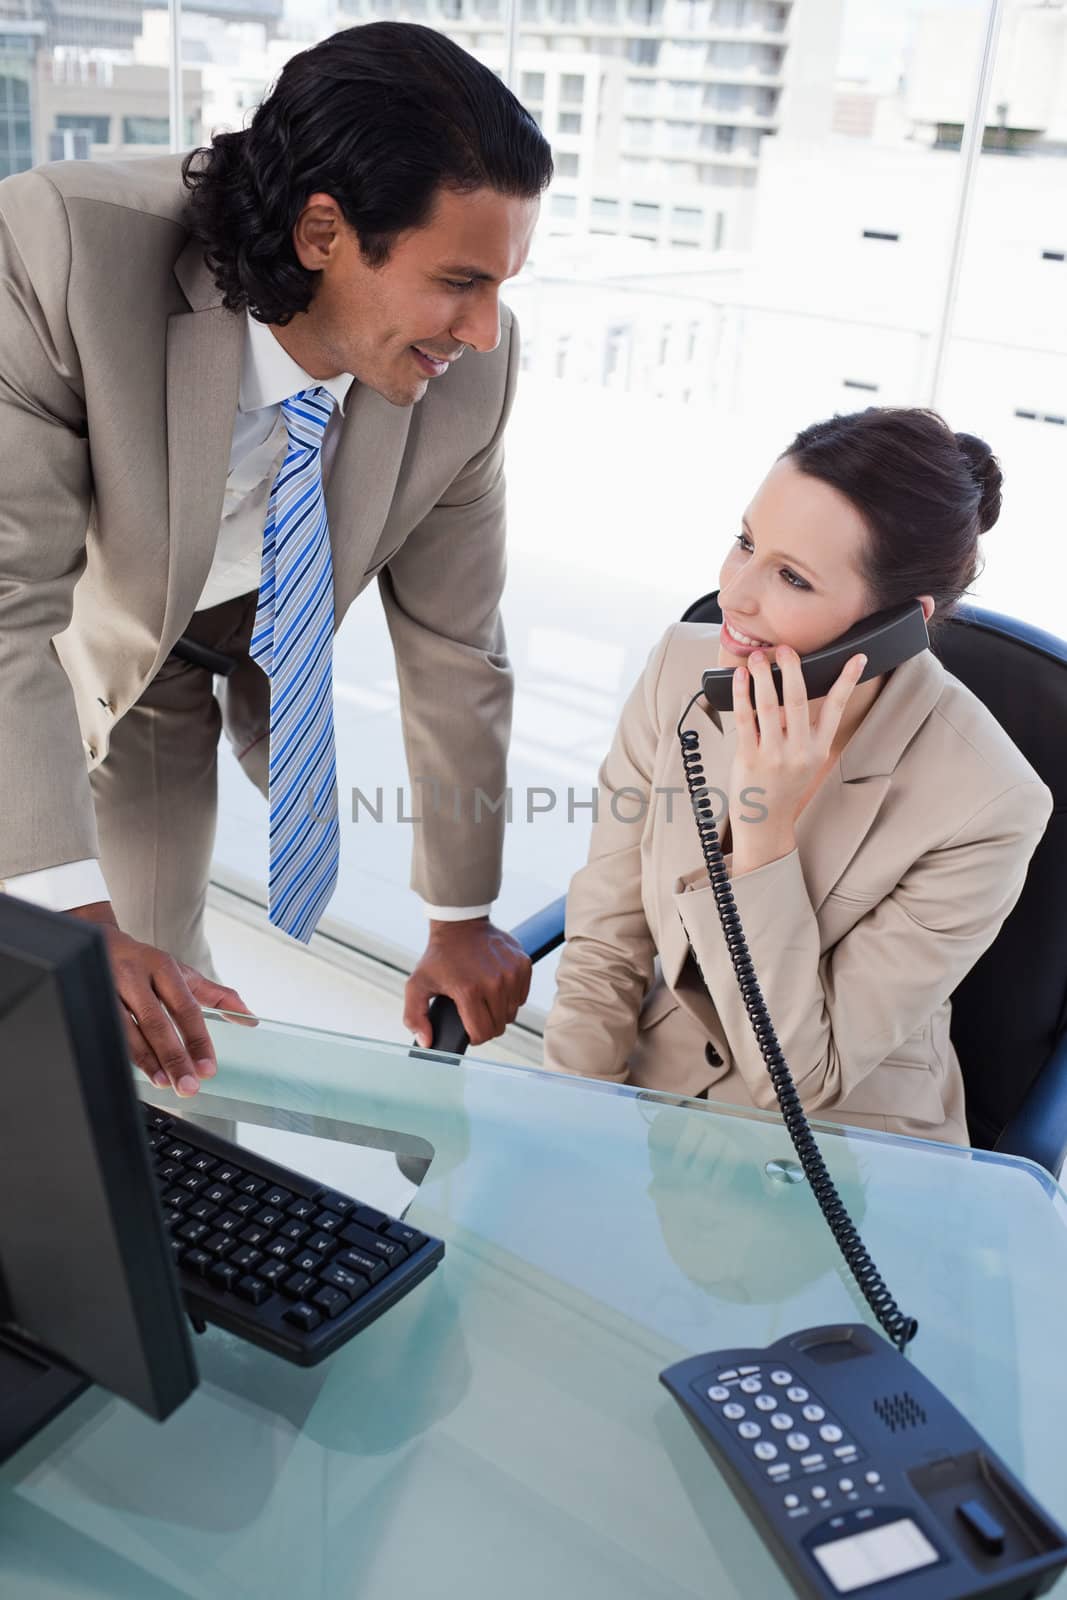 Portrait of a businesswoman on the phone while working with an employee in an office